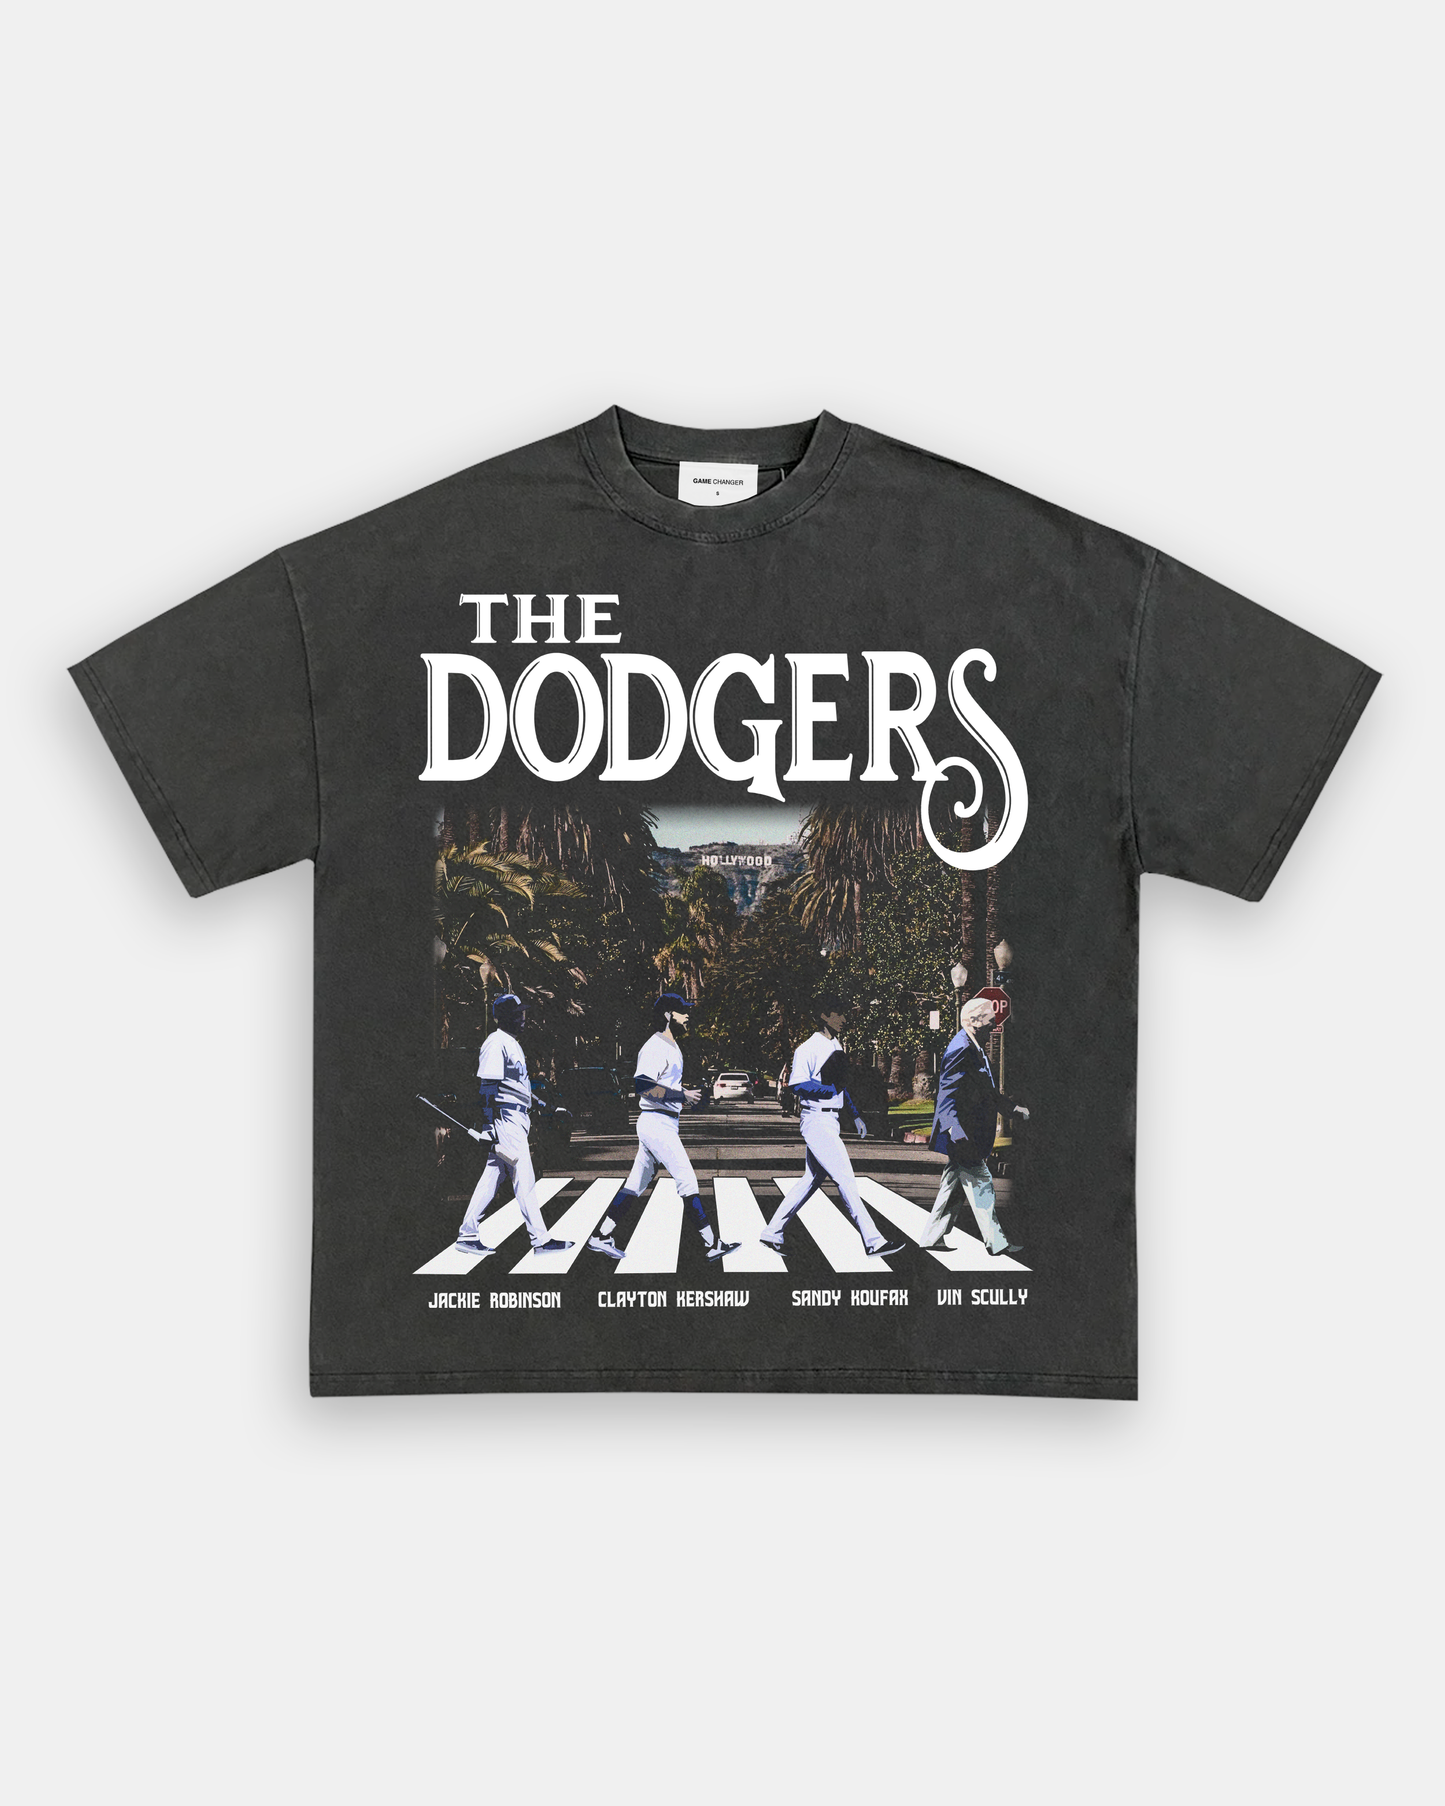 The Los Angeles Dodgers Baseball Abbey Road Signatures T-shirt